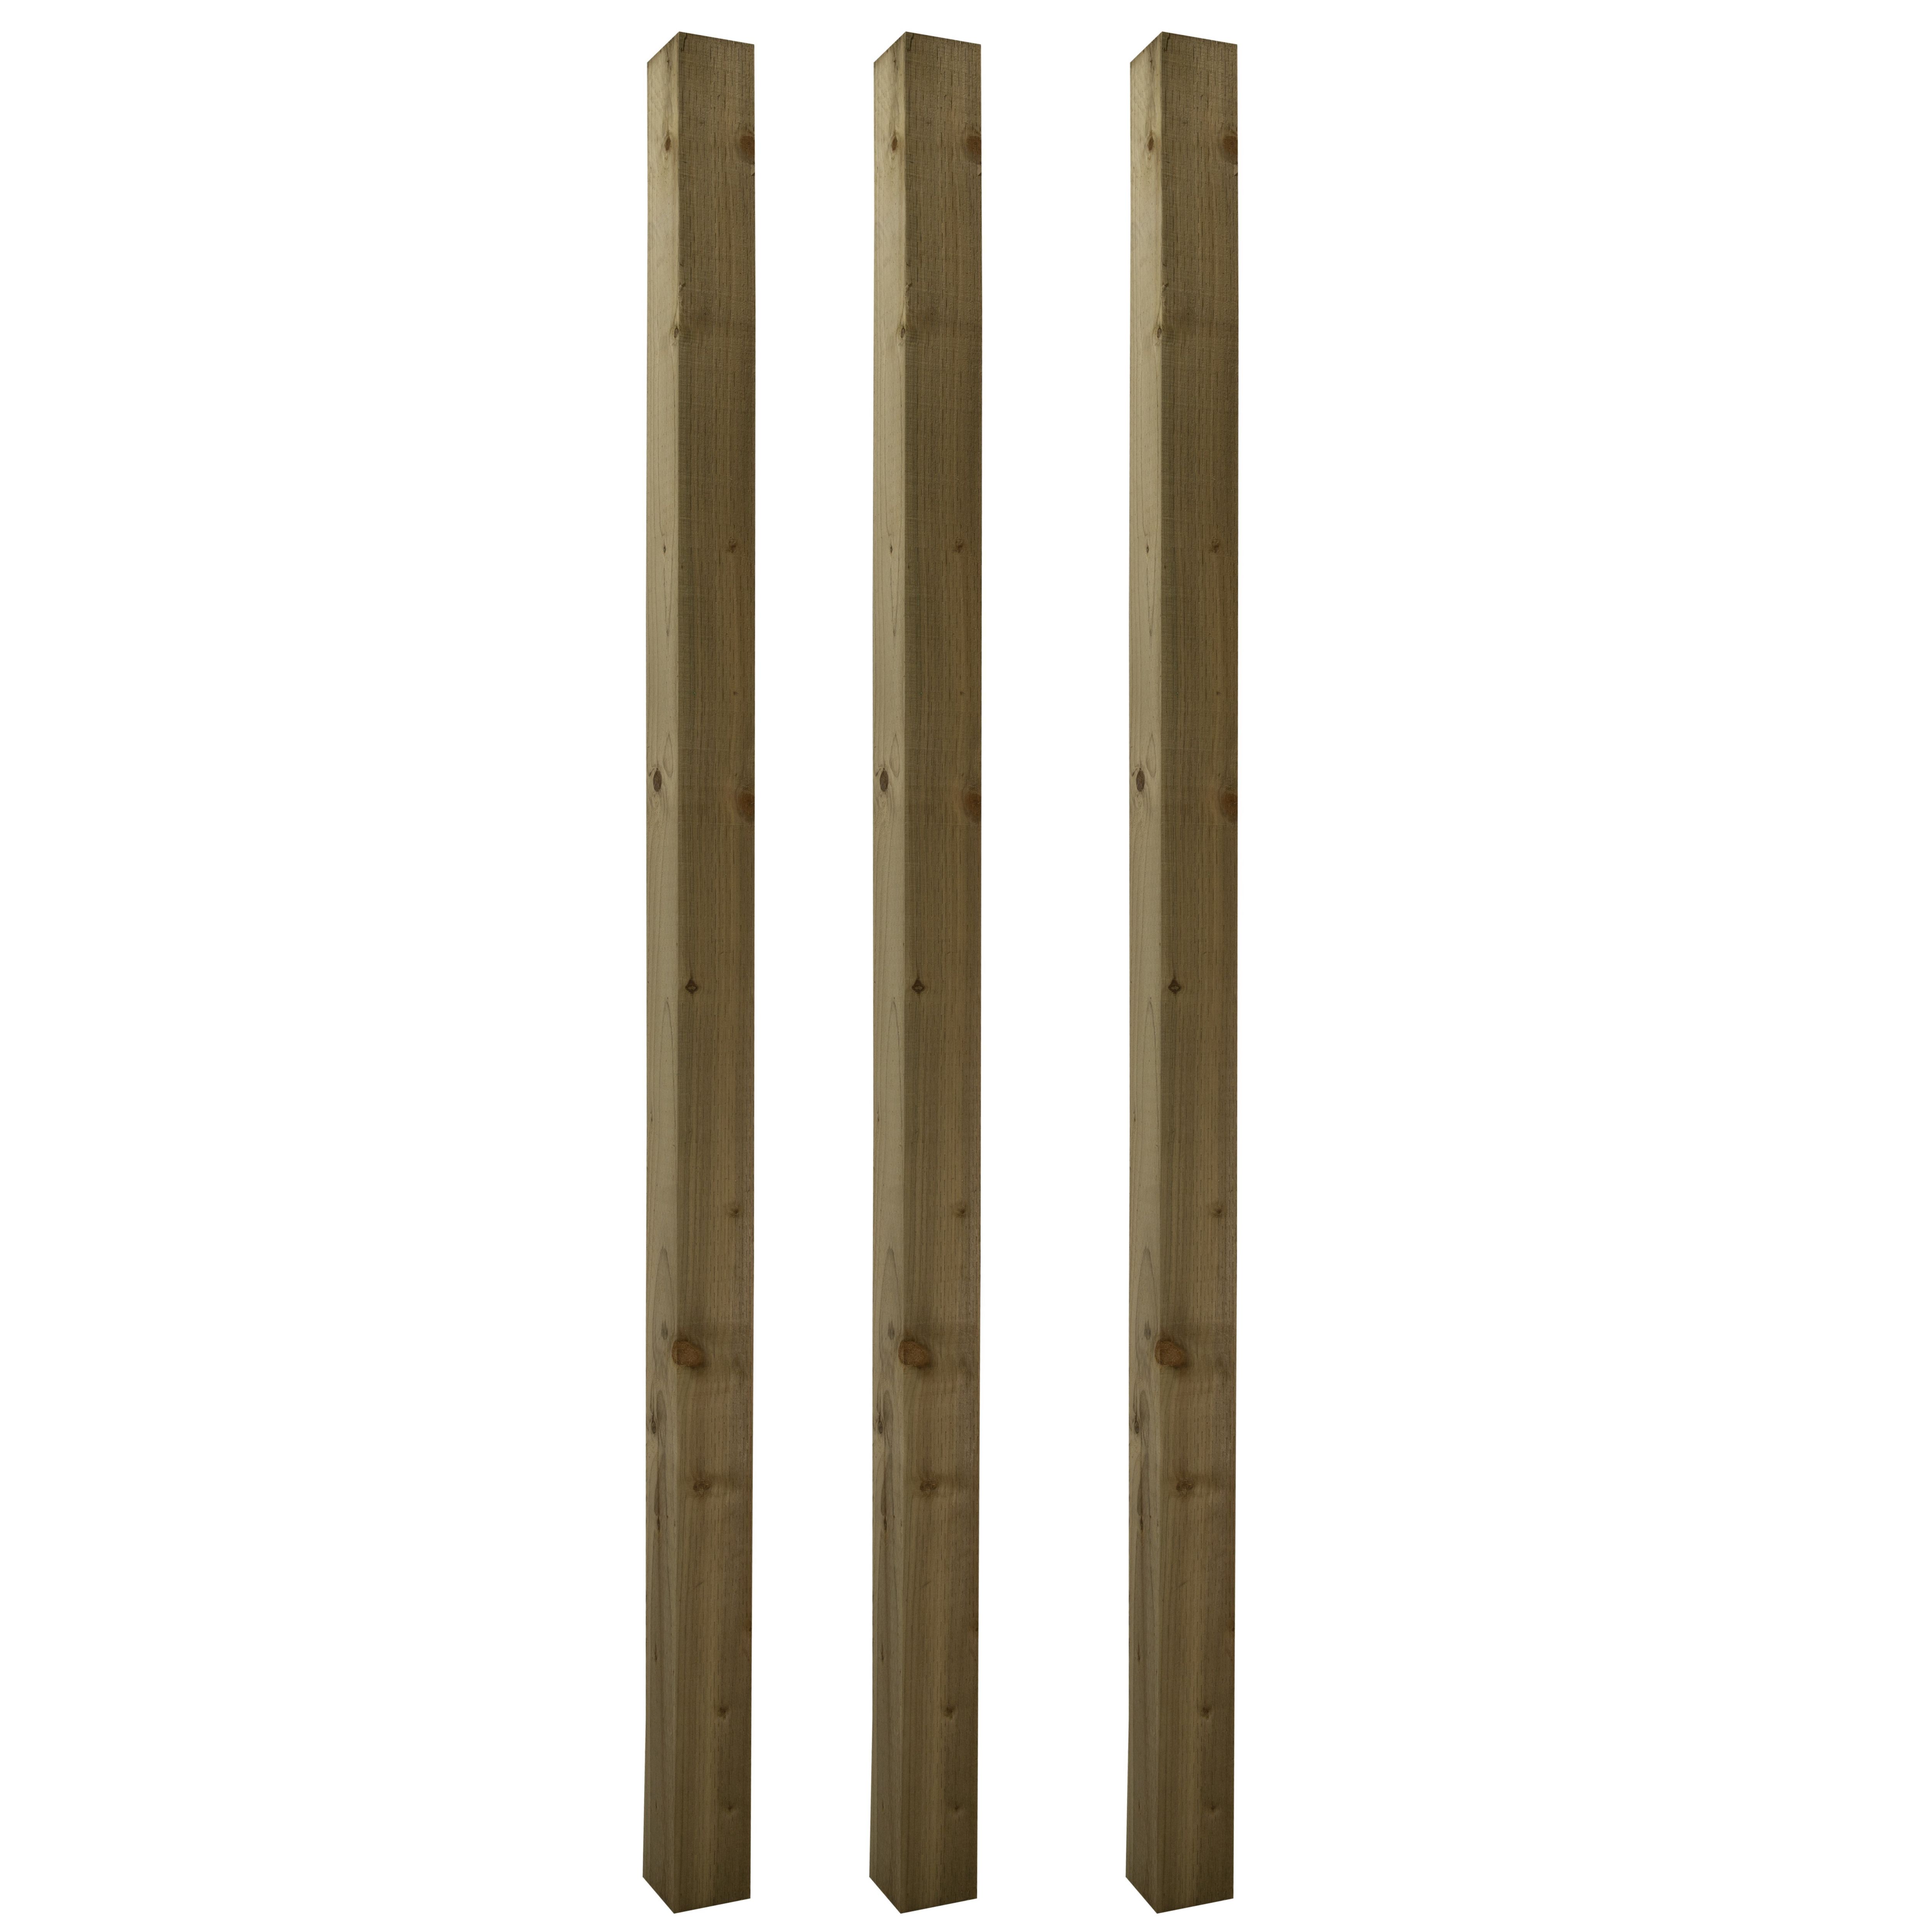 UC4 Green Square Wooden Fence post (H)2.4m (W)100mm, Pack of 3